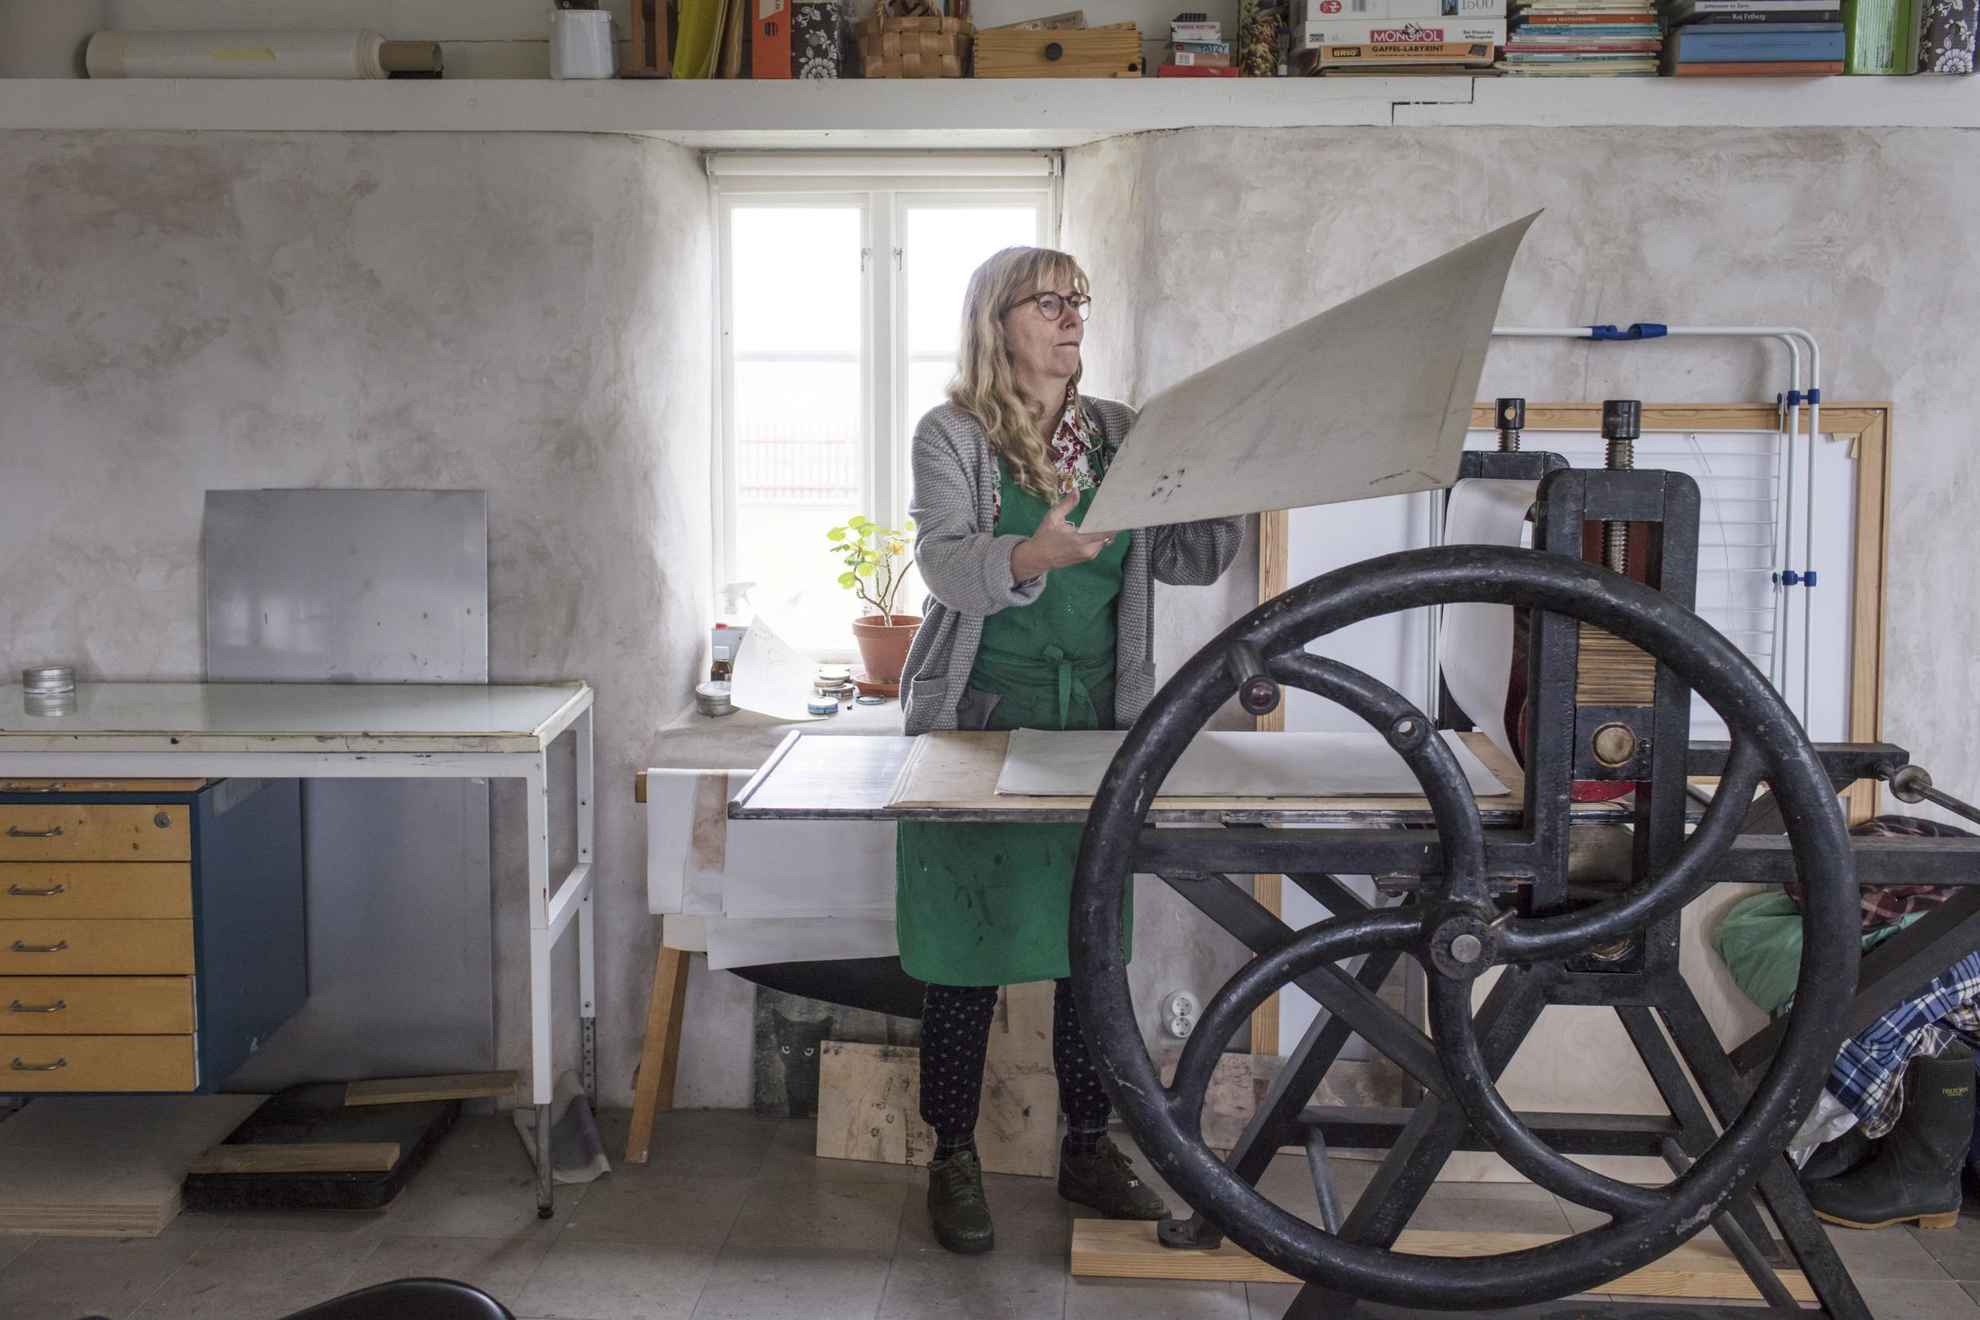 The artist Karin Mamma Andersson is working next to a large iron hand press in her studio.